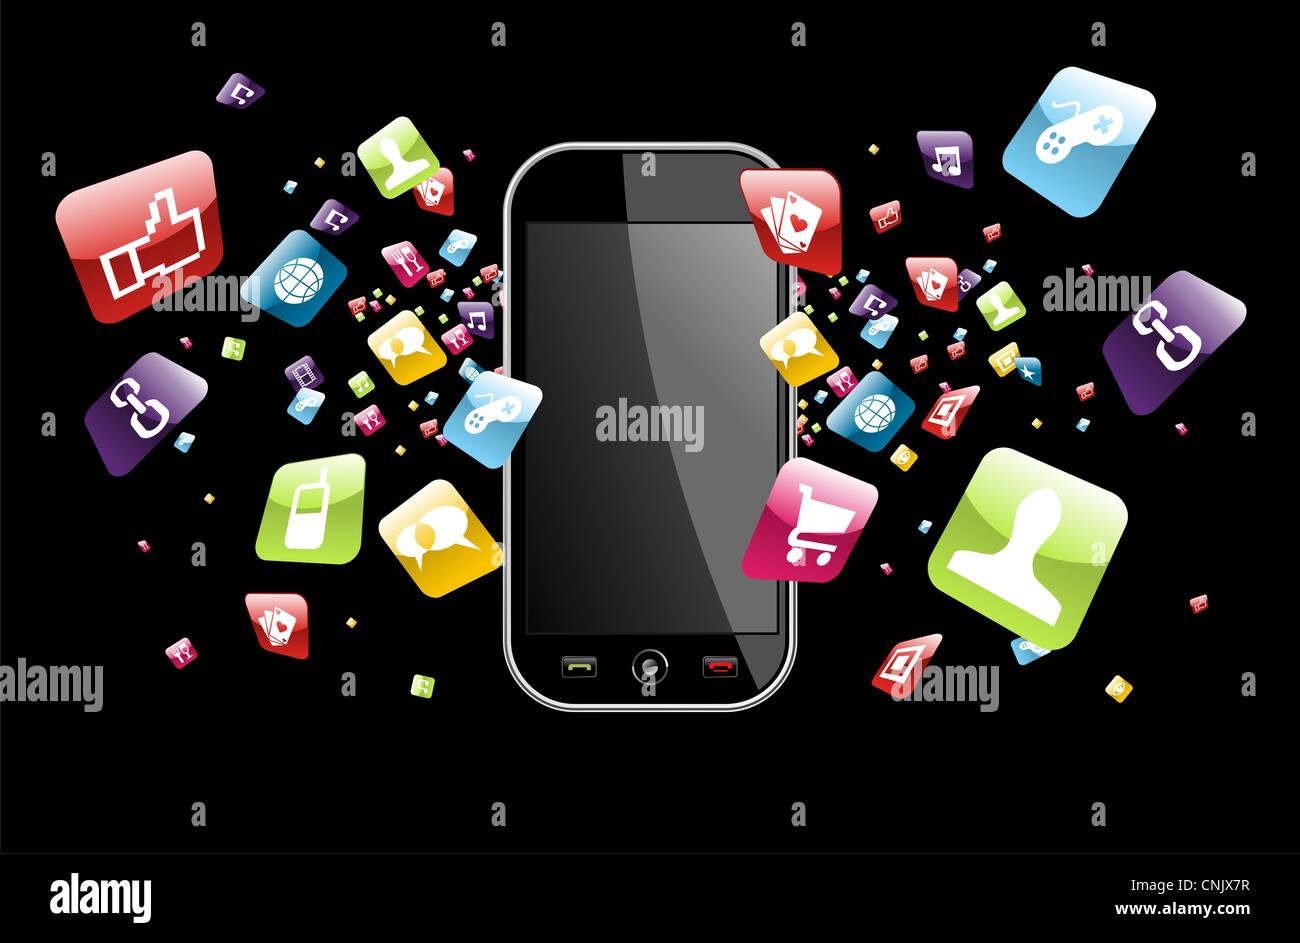 Iphone application icons splash out of phone on black background. Vector file layered for easy manipulation and customisation. Stock Photo